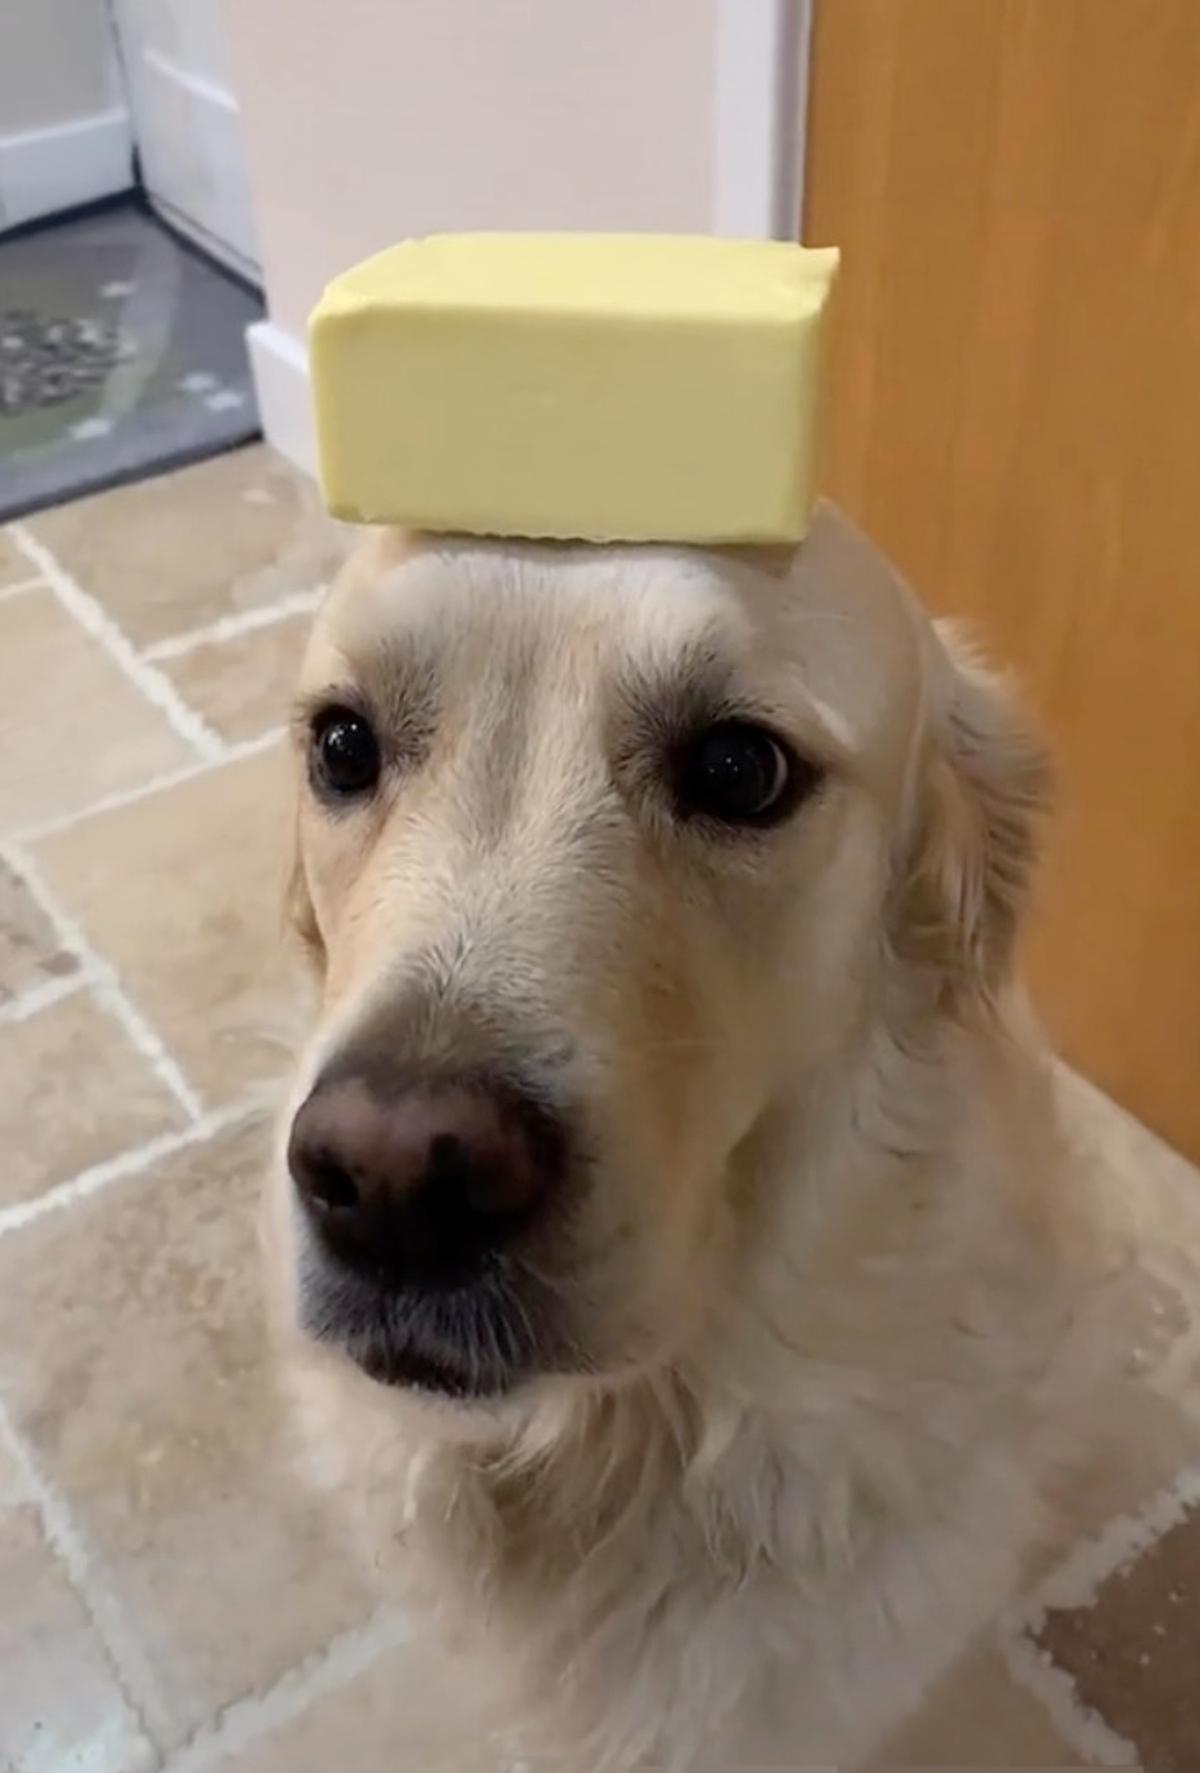 Dexter balancing a stick of butter on his head. (Courtesy of Caters News)